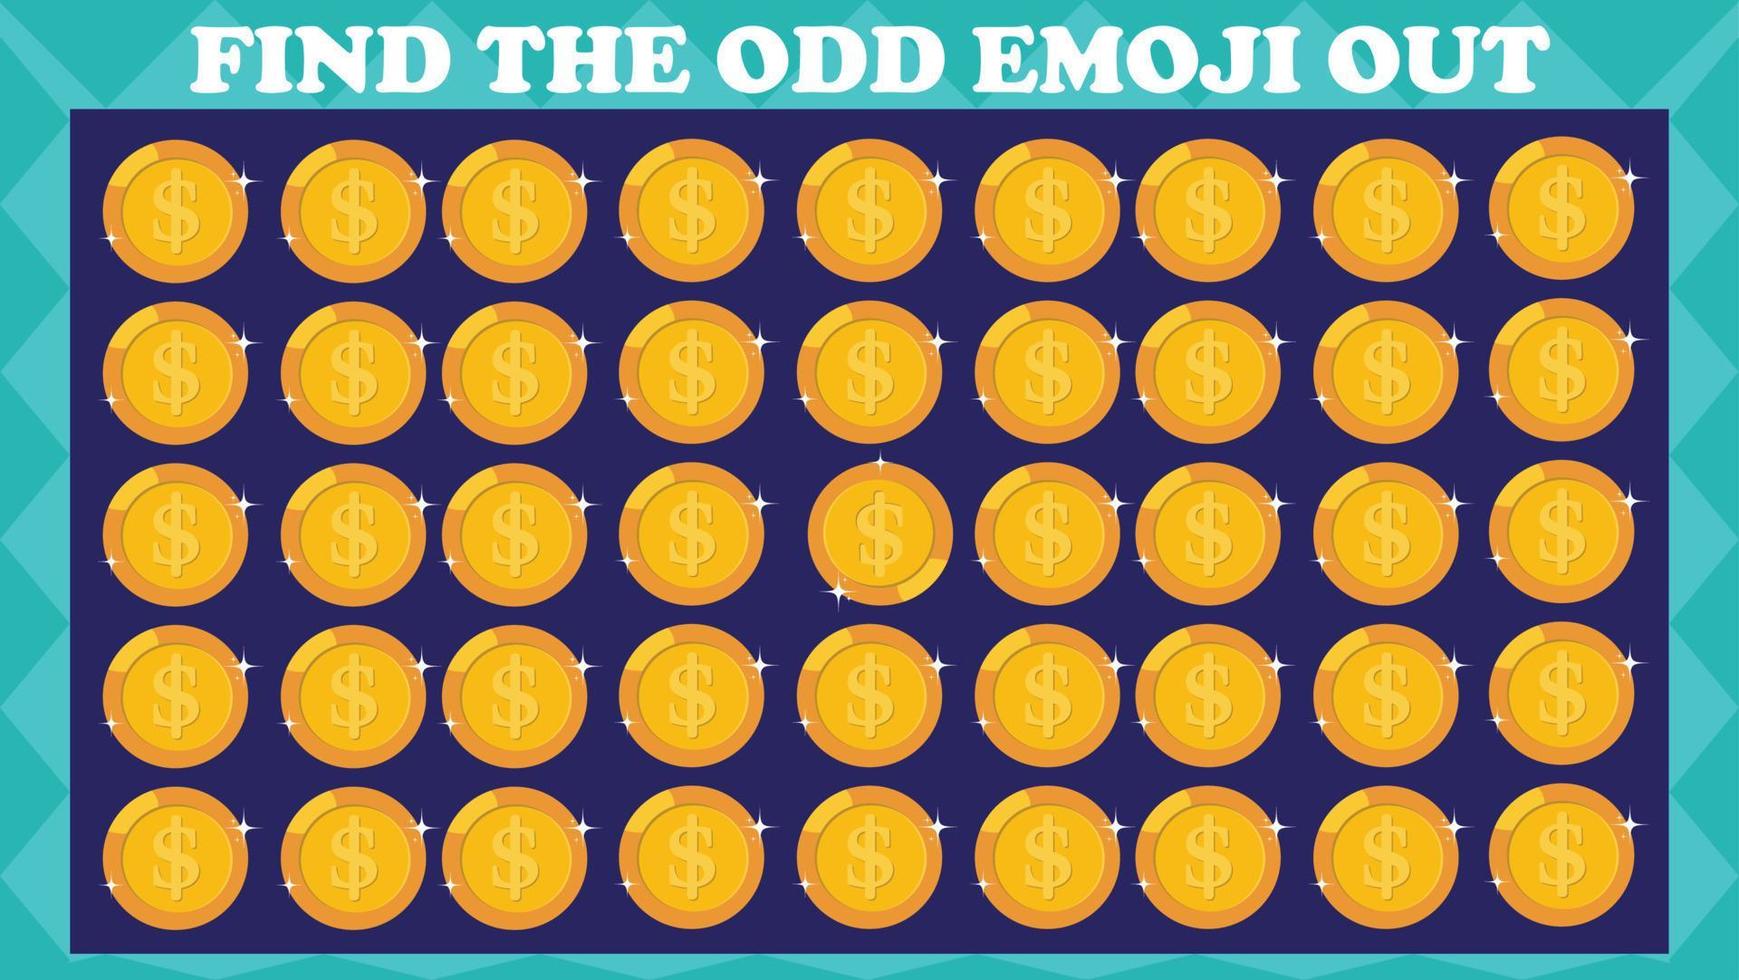 Find The Odd Emoji Out 14, Visual Logic Puzzle Game. Activity Game For Children. Vector Illustration.